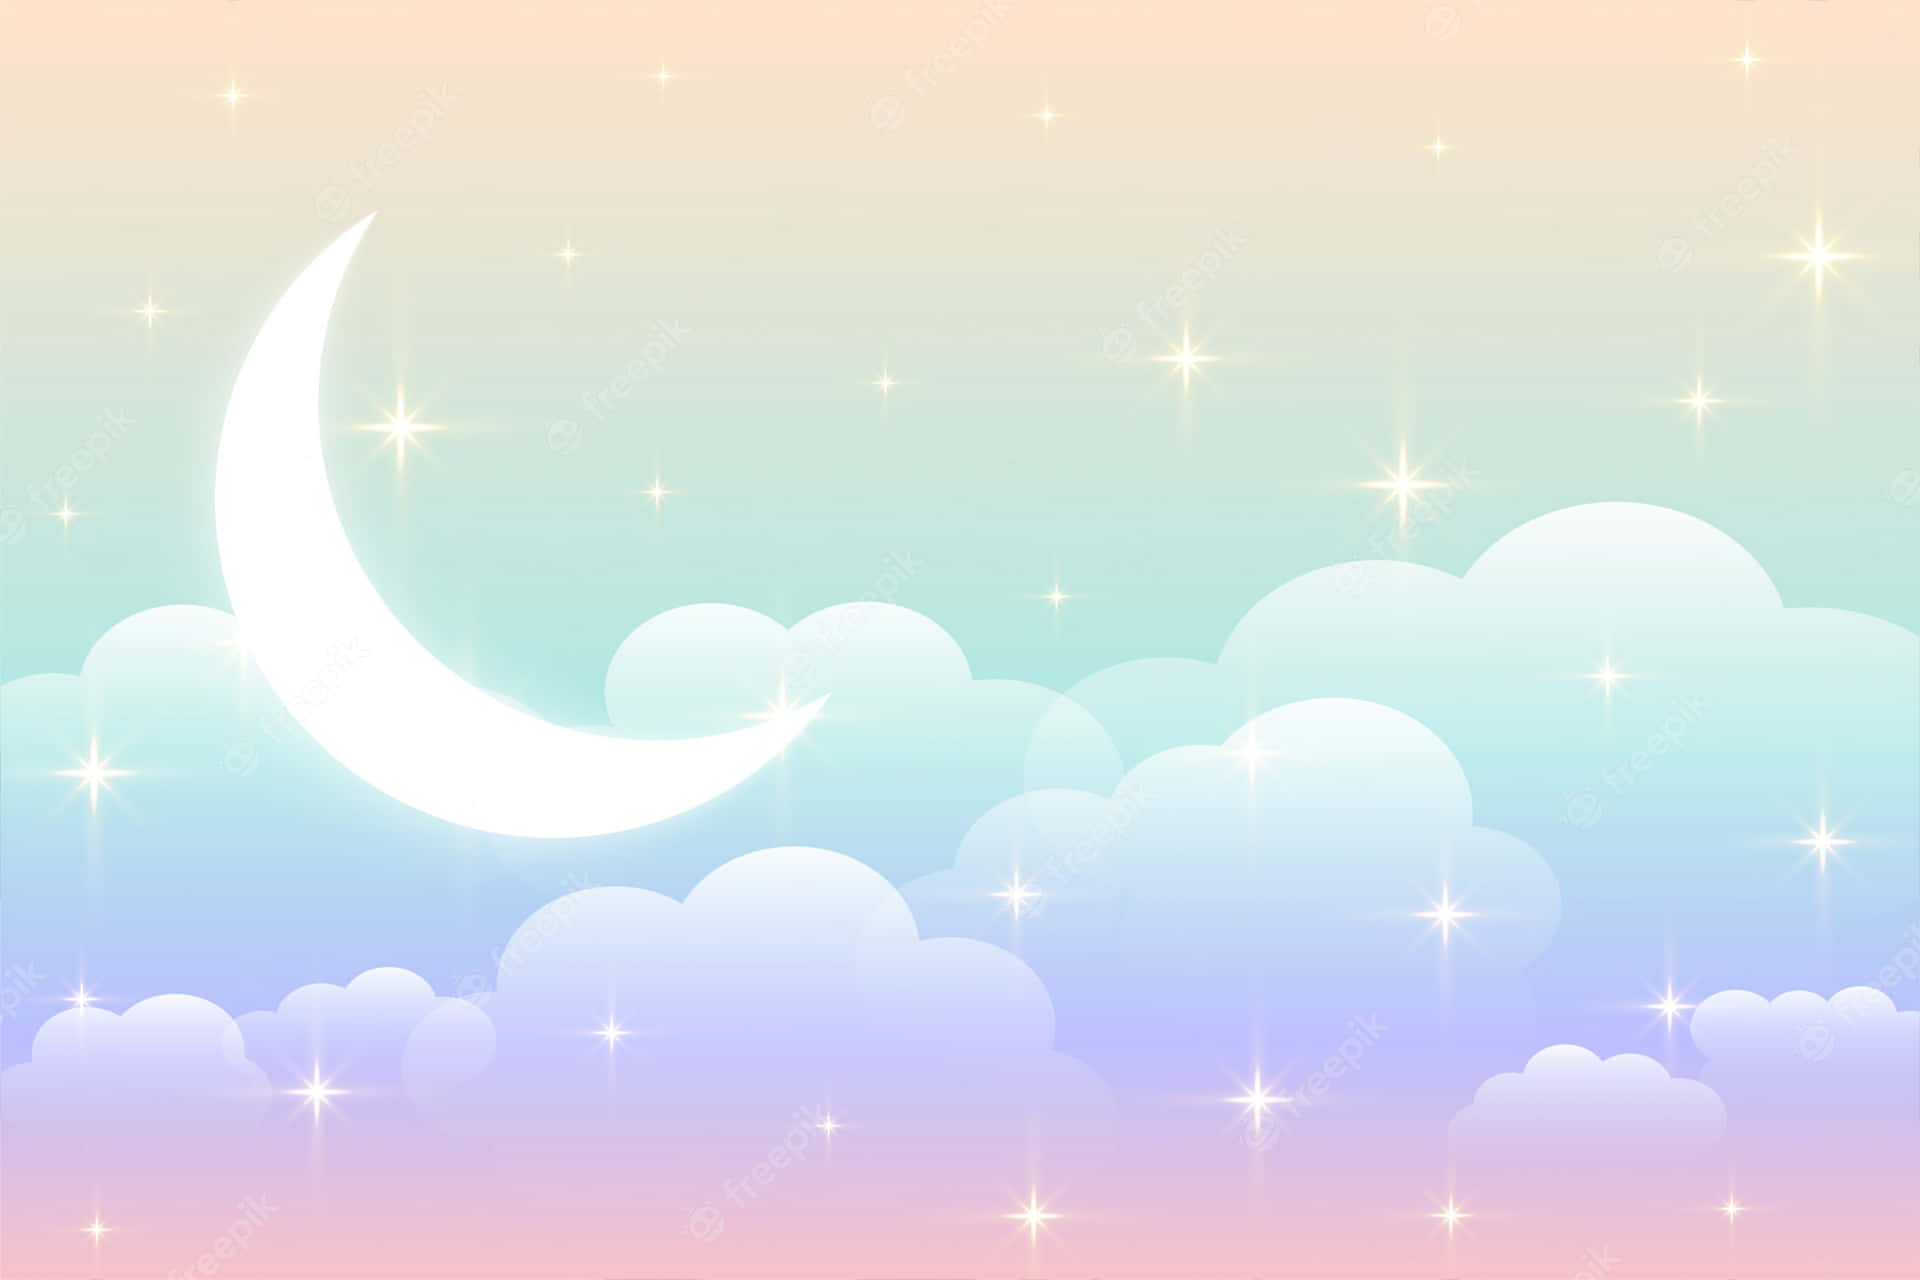 A whimsical moon hangs peacefully in the night sky, its pastel glow adding a beautiful dash of color to the darkness. Wallpaper